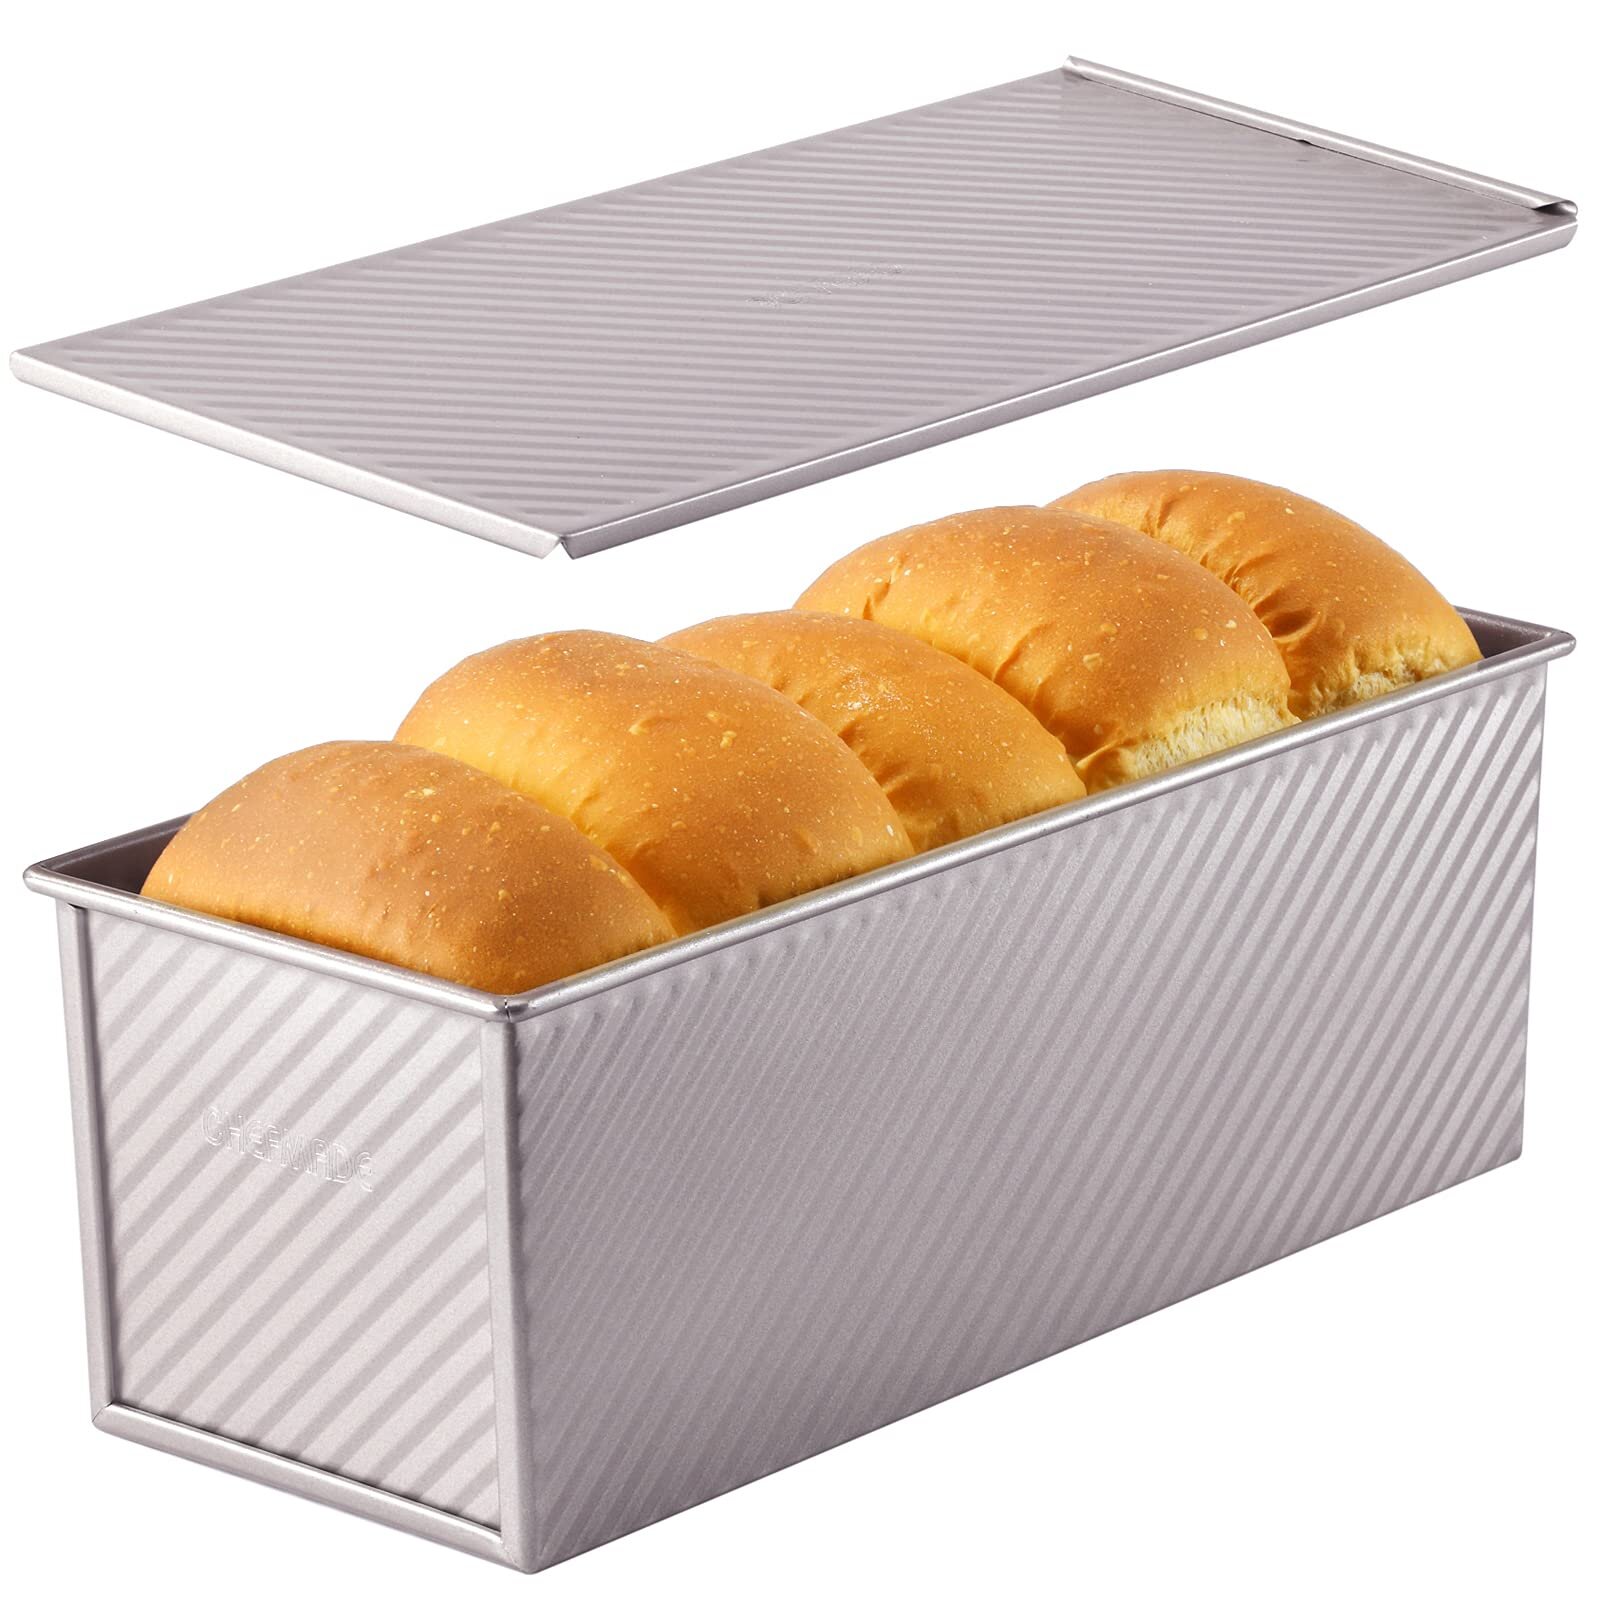 CHEFMADE 2LB Rectangle Loaf Pan, Non-Stick Oblong Bread and Meat